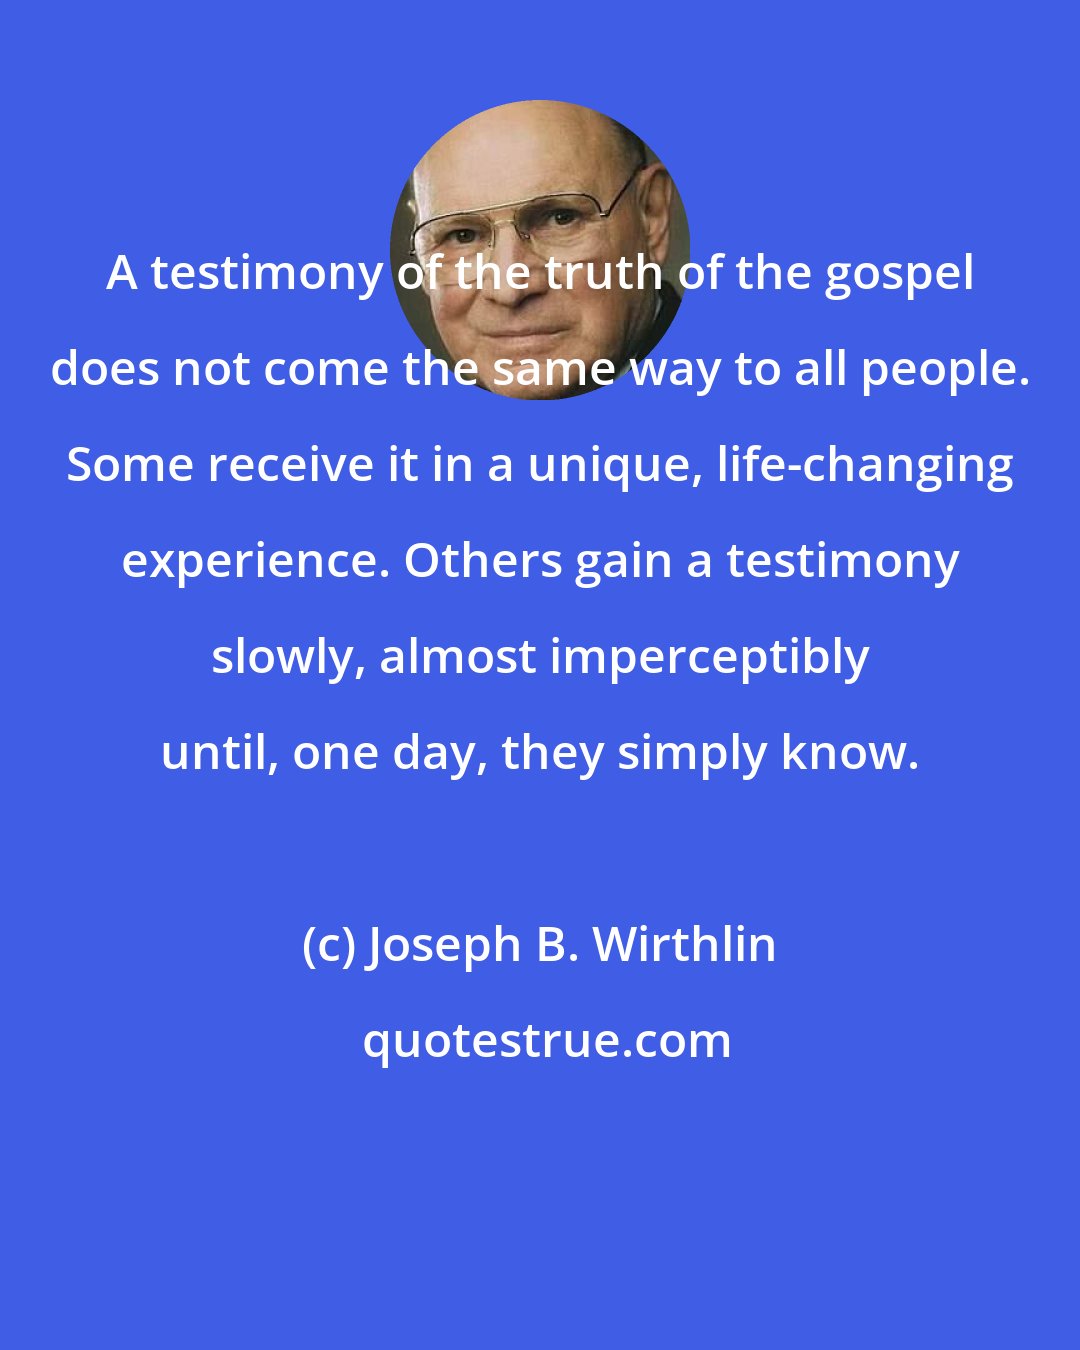 Joseph B. Wirthlin: A testimony of the truth of the gospel does not come the same way to all people. Some receive it in a unique, life-changing experience. Others gain a testimony slowly, almost imperceptibly until, one day, they simply know.